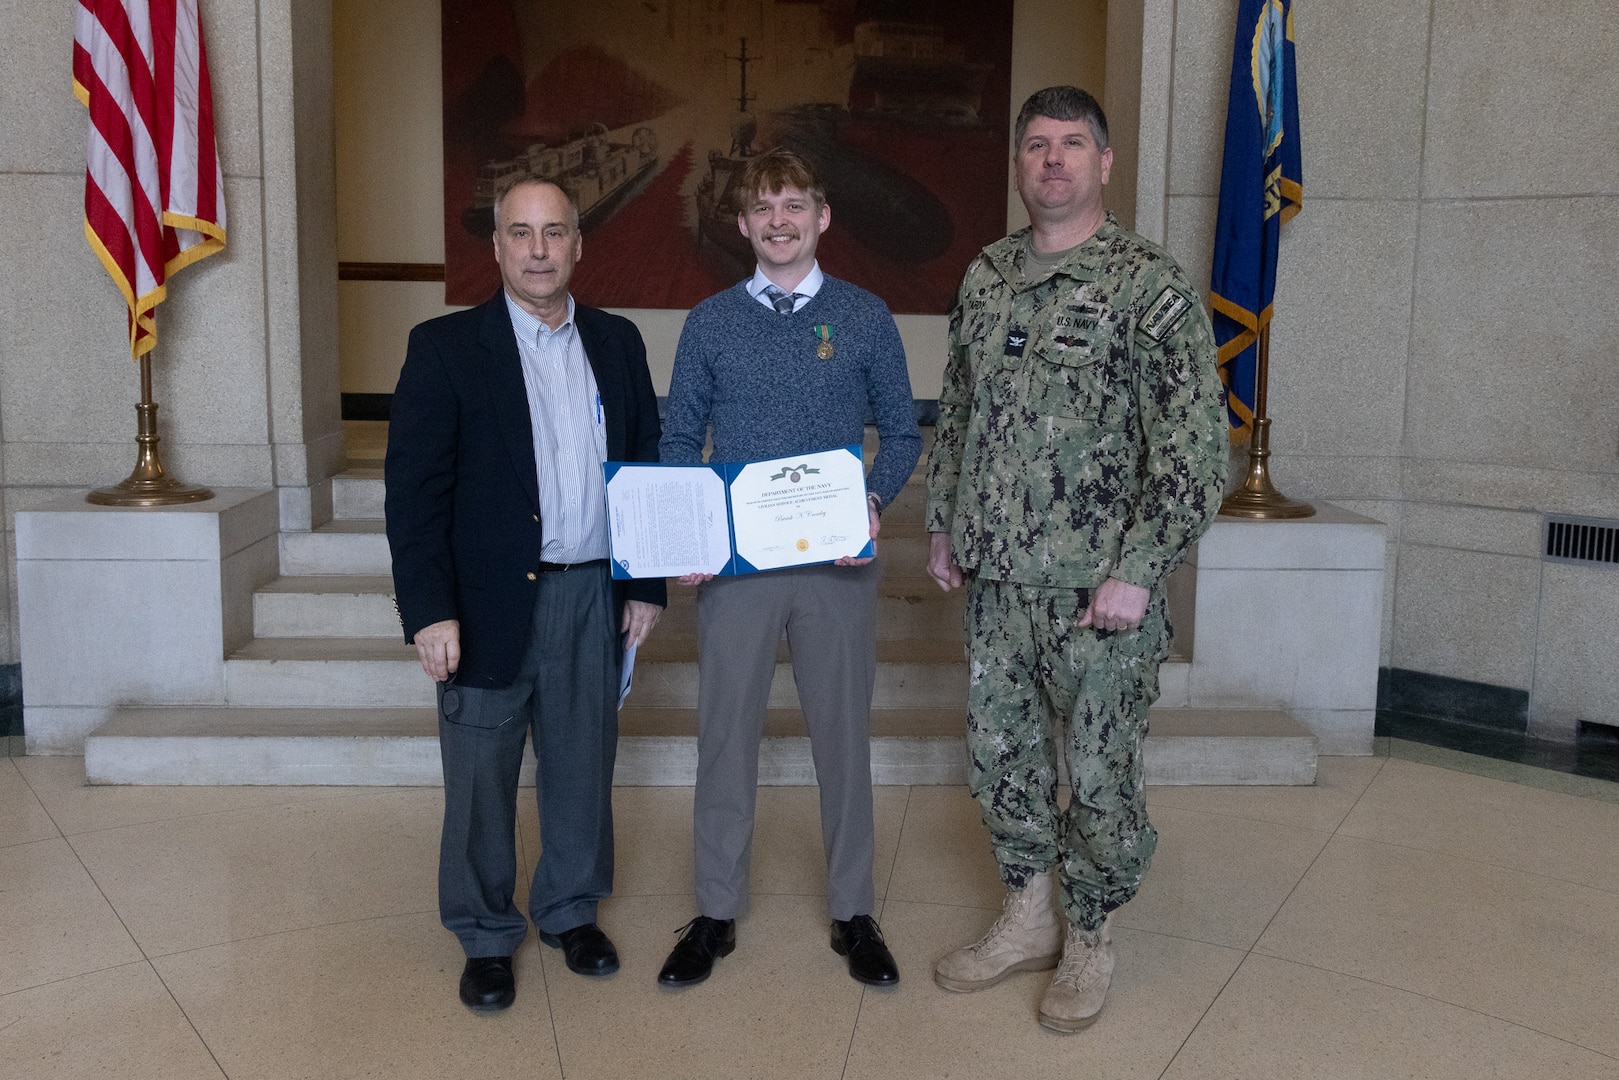 Naval Surface Warfare Center, Carderock Division Commanding Officer Capt. Matthew Tardy (right) pins Naval Architect Patrick Crowley (left) with the Department of Navy Civilian Service Achievement Medal.